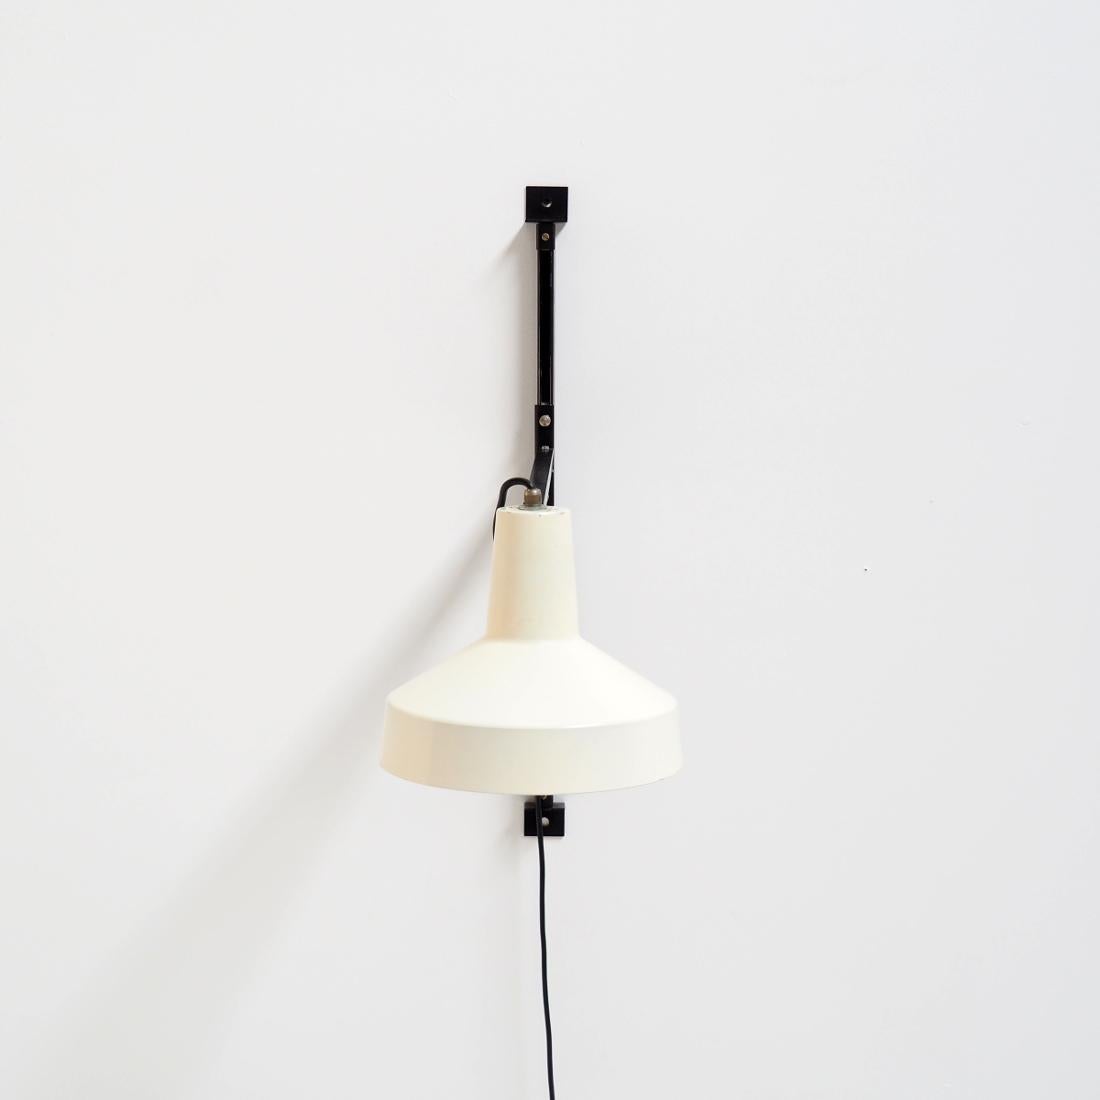 Modern lamp designed by Dutch designer Niek Hiemstra for Hiemstra Evolux in the 1960’s. The shade is fully adjustable just like the arm. It’s adjustable in depth, in height and from left to right.

In full original condition with minimal wear and